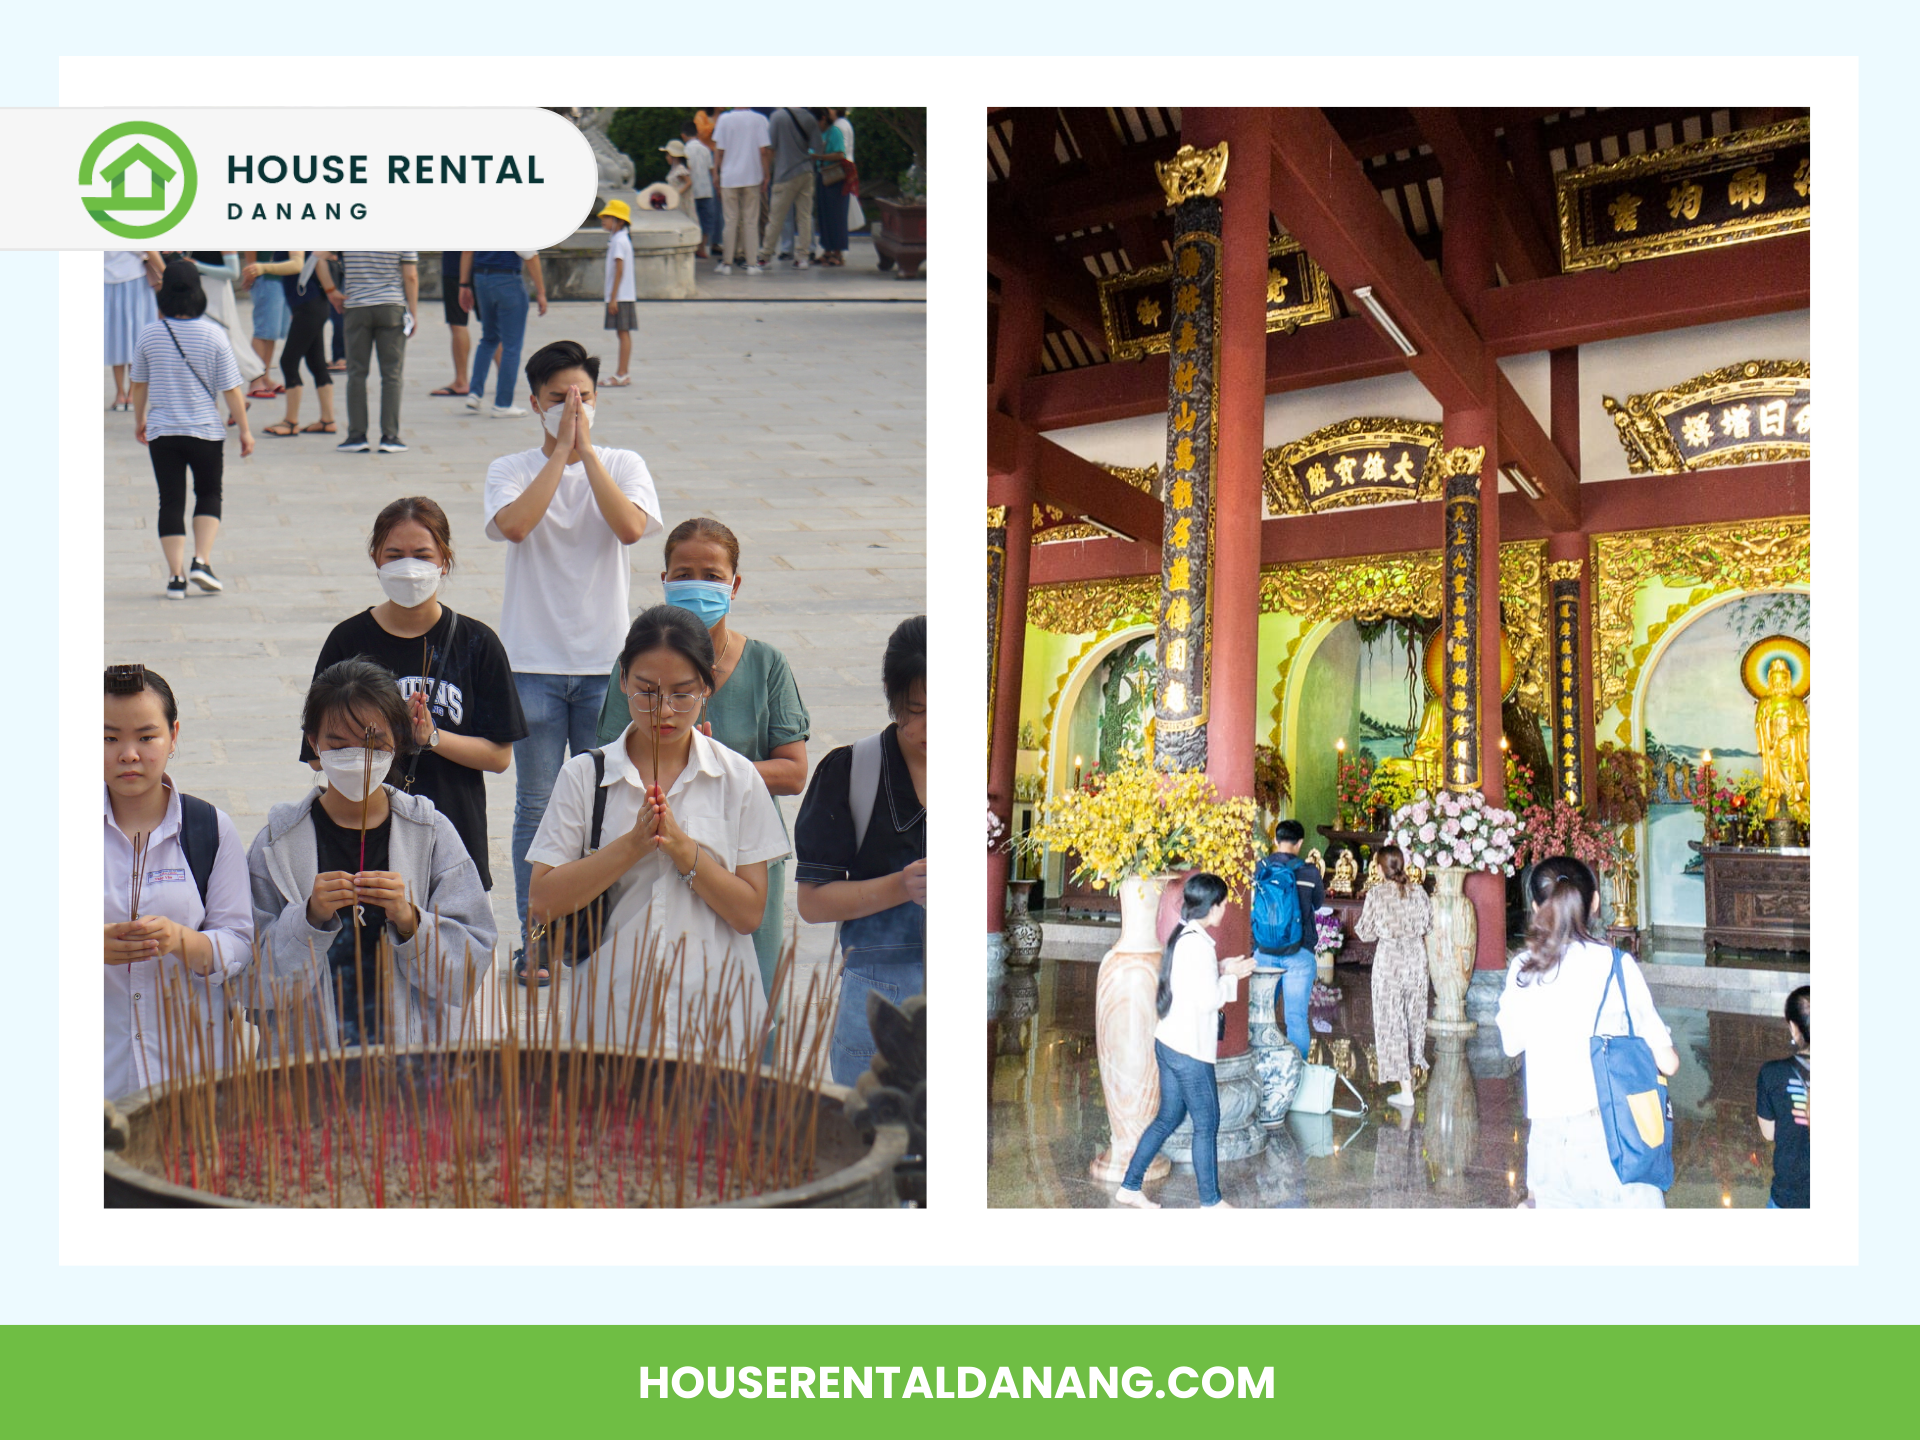 Two images side by side: one shows several people praying with incense outdoors at Linh Ung Pagoda, and the other shows people inside a decorated temple. Both images include informational text about House Rental Danang.